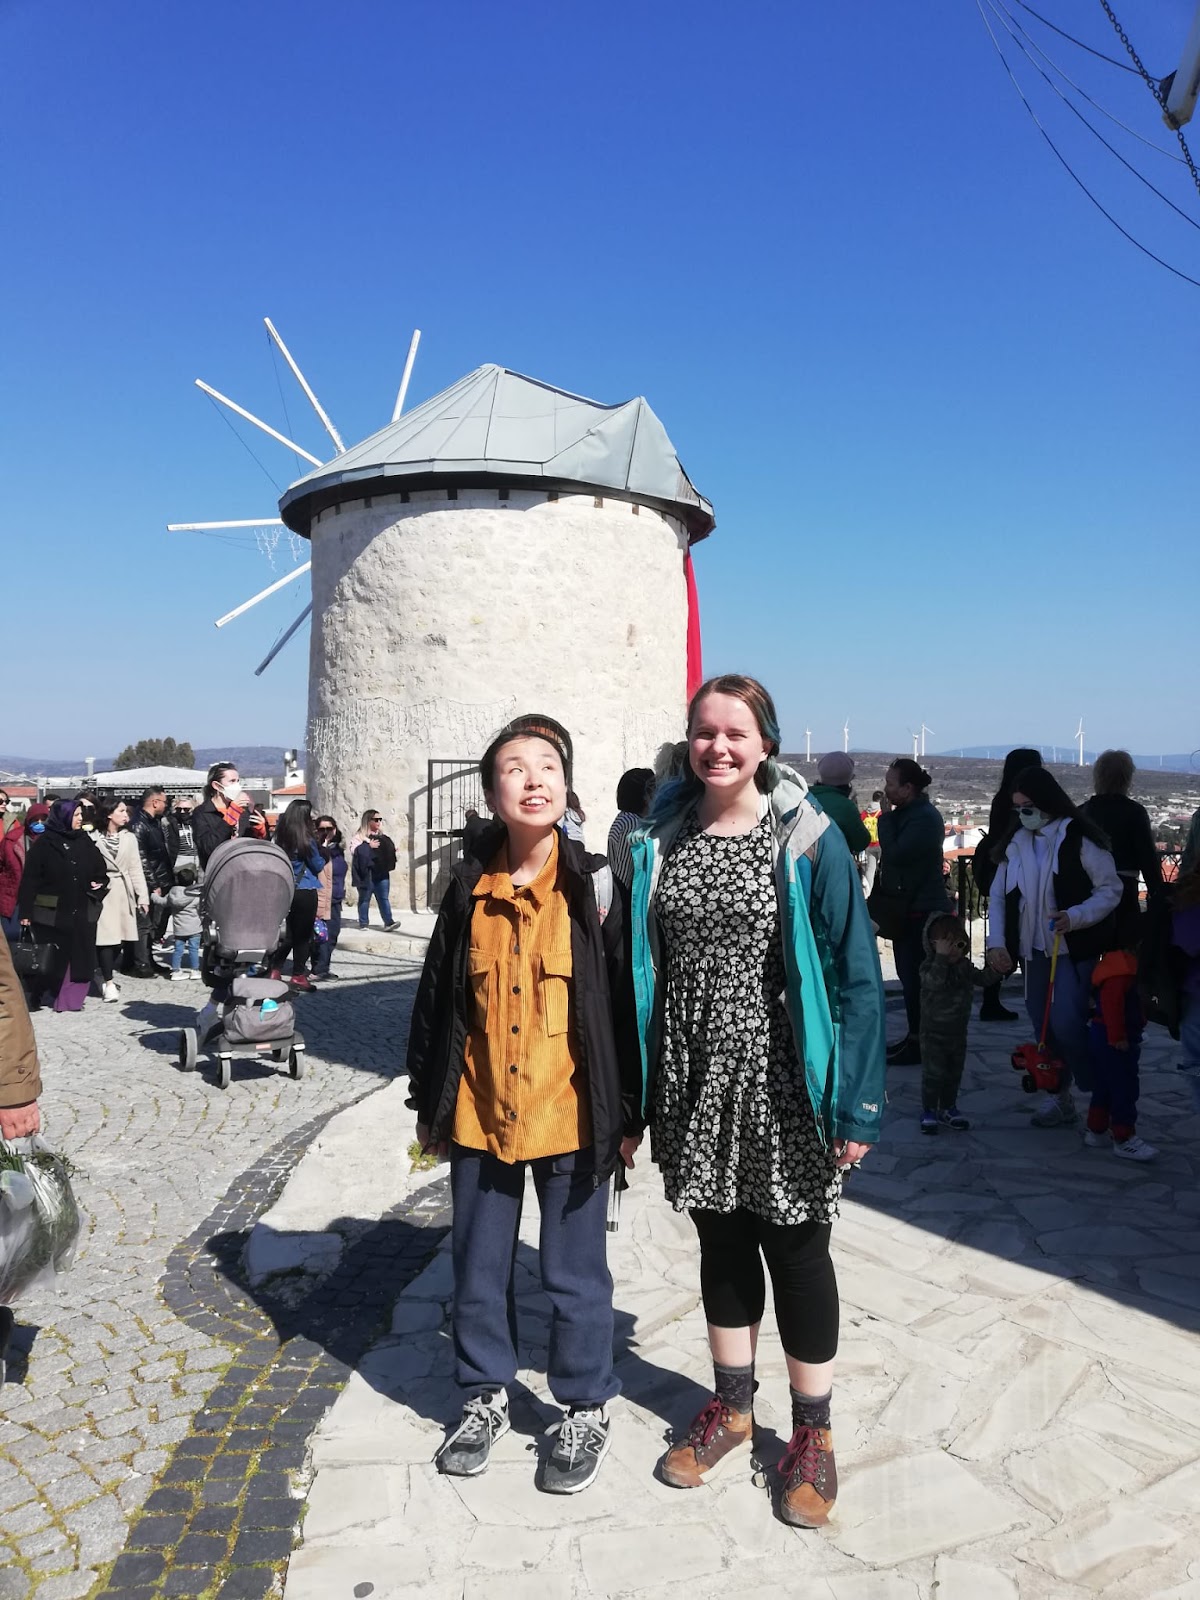 Miso and friend in front of windmill.